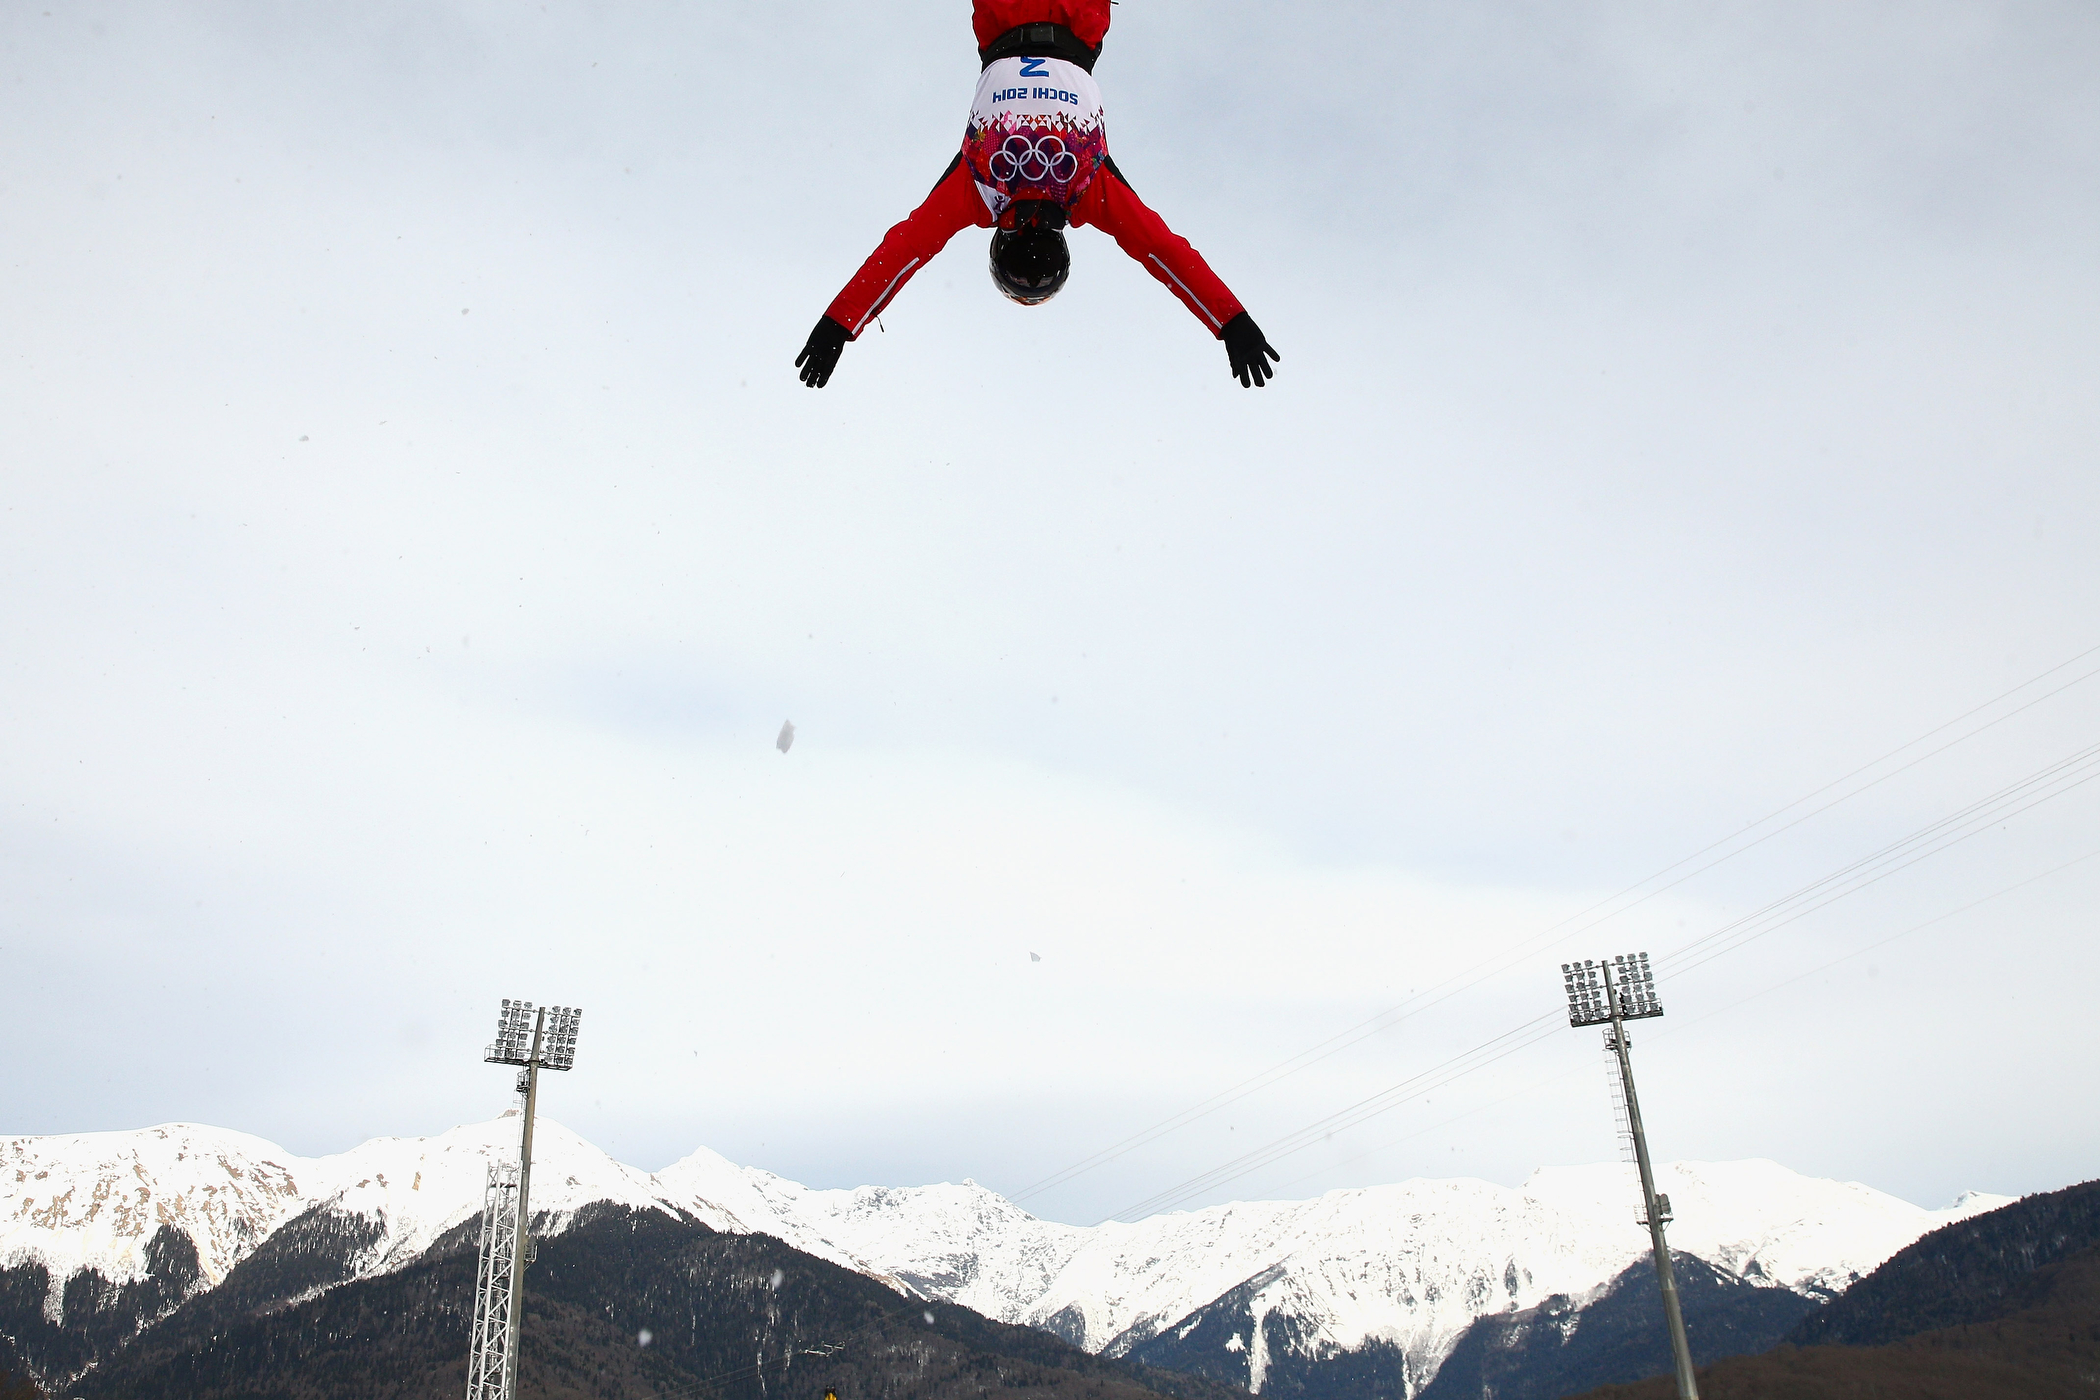 An athlete trains during Aerials practice during day two of the Sochi 2014 Winter Olympics at Rosa Khutor Extreme Park on Feb. 9, 2014 in Sochi, Russia.